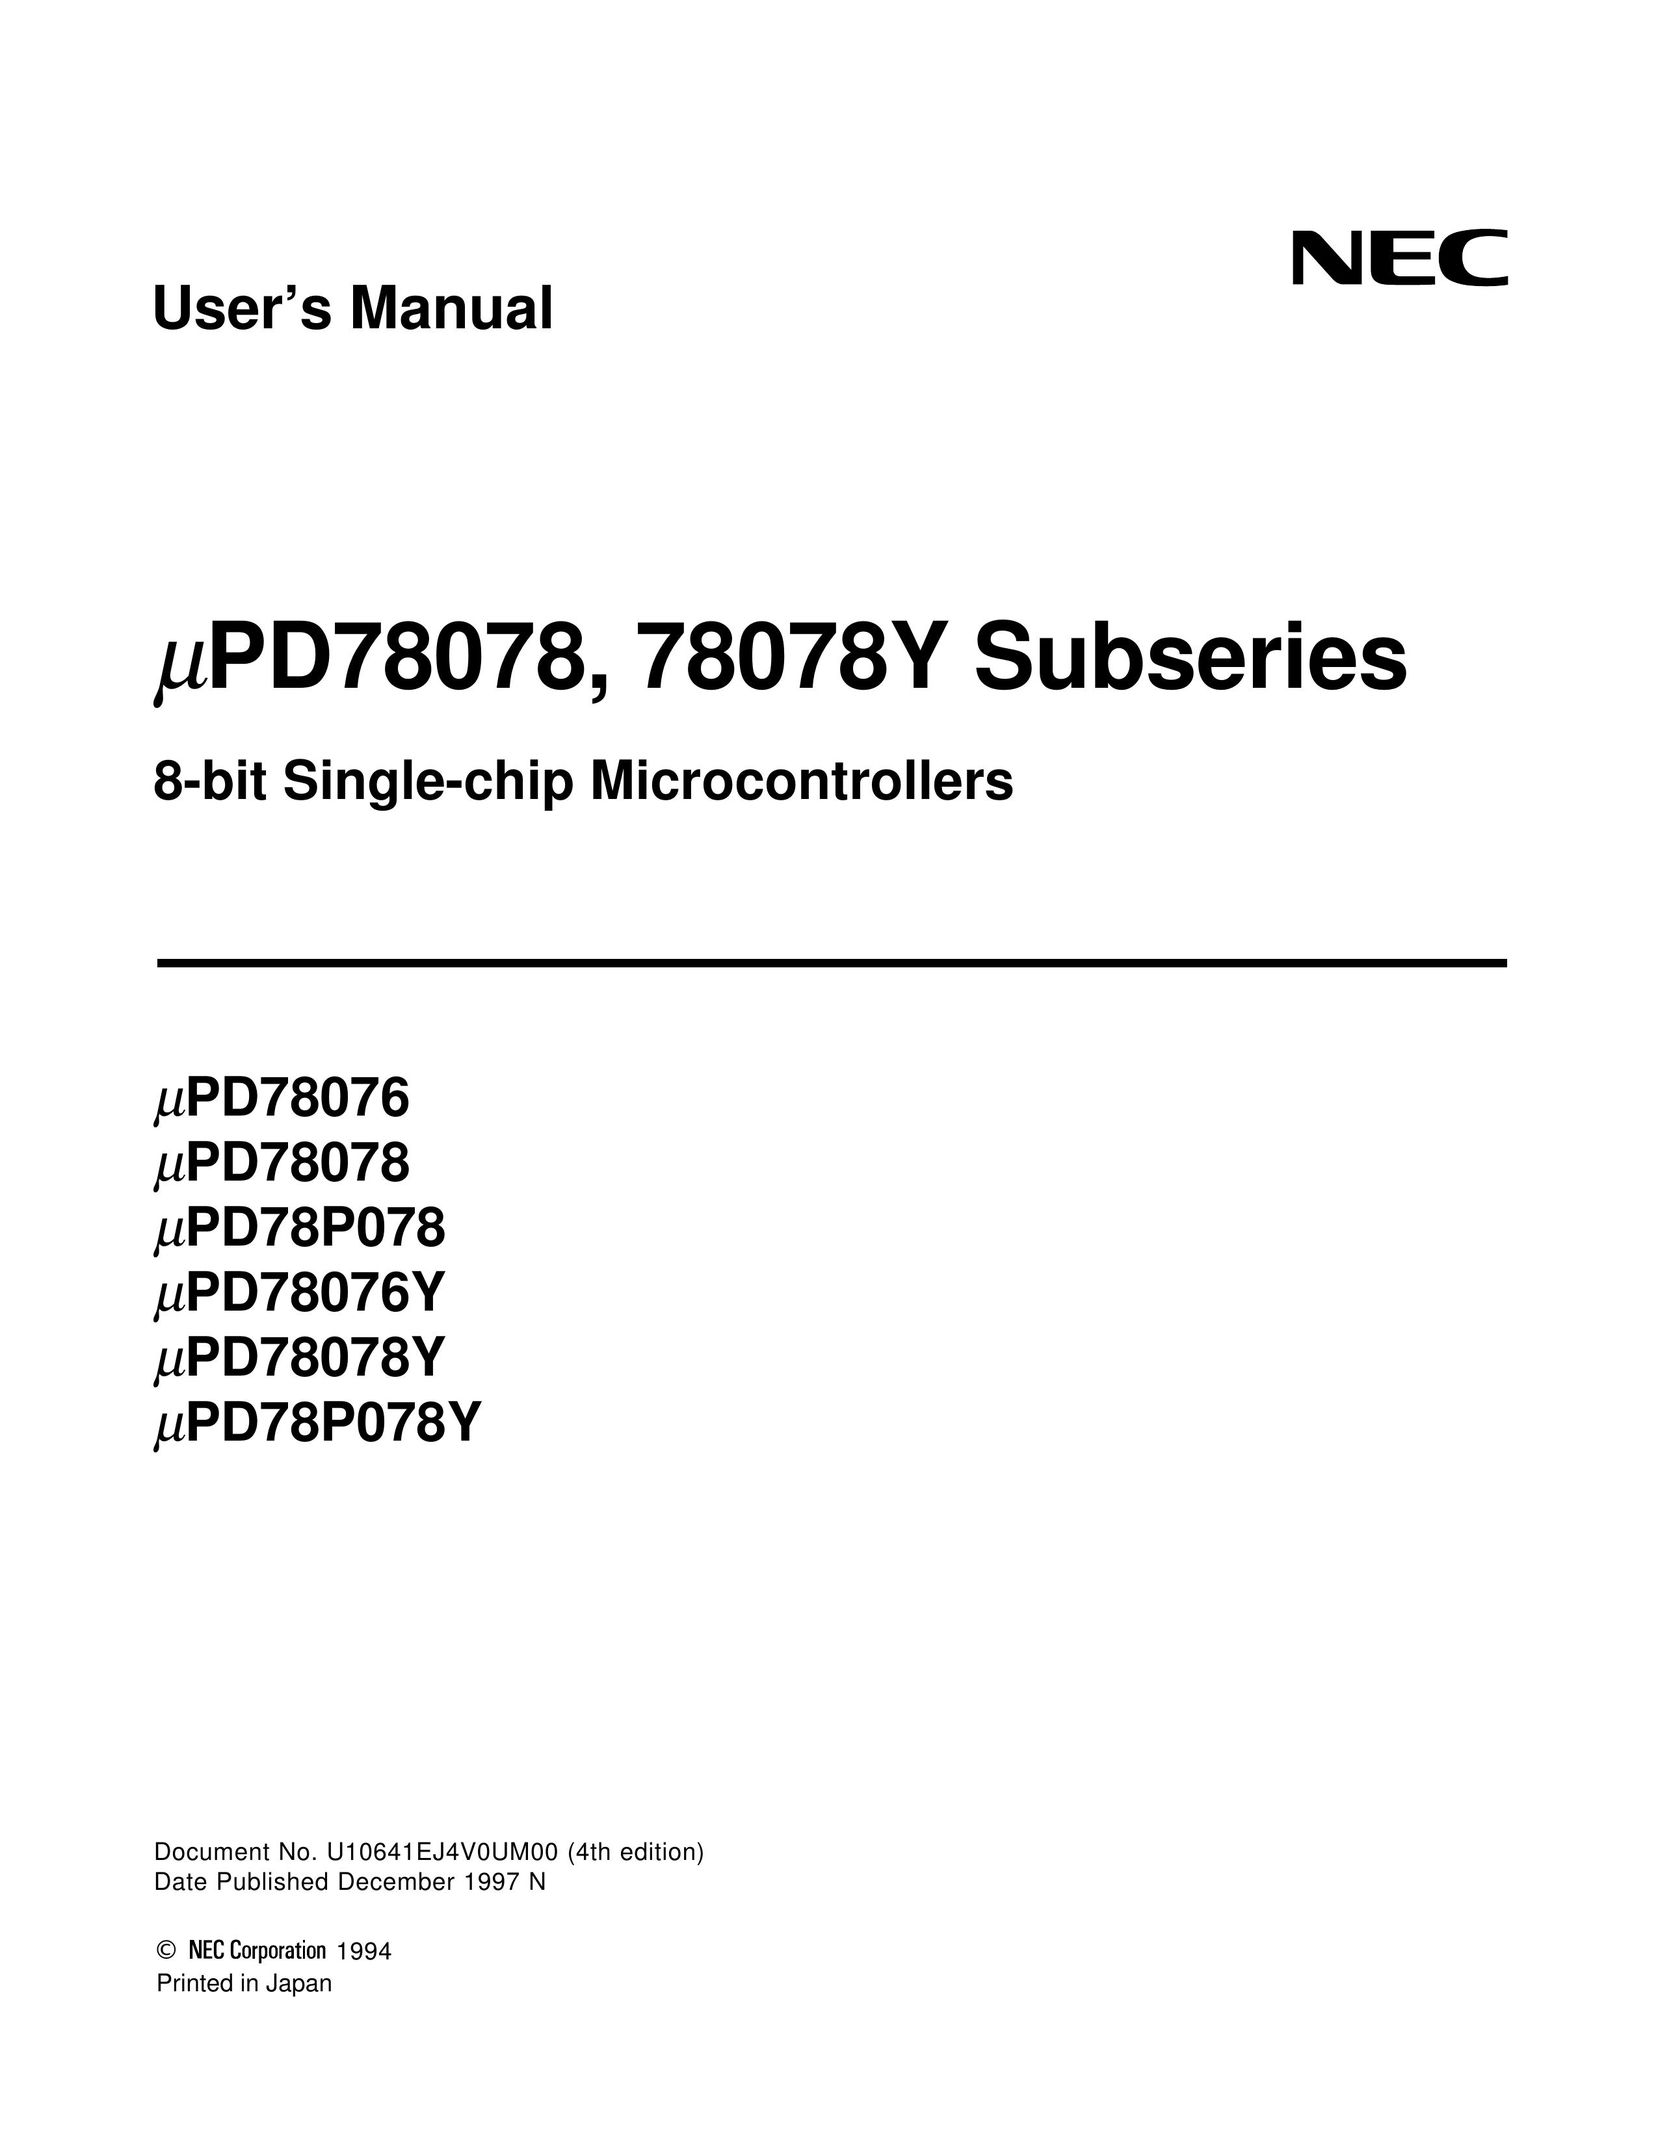 NEC PD78076Y Network Card User Manual